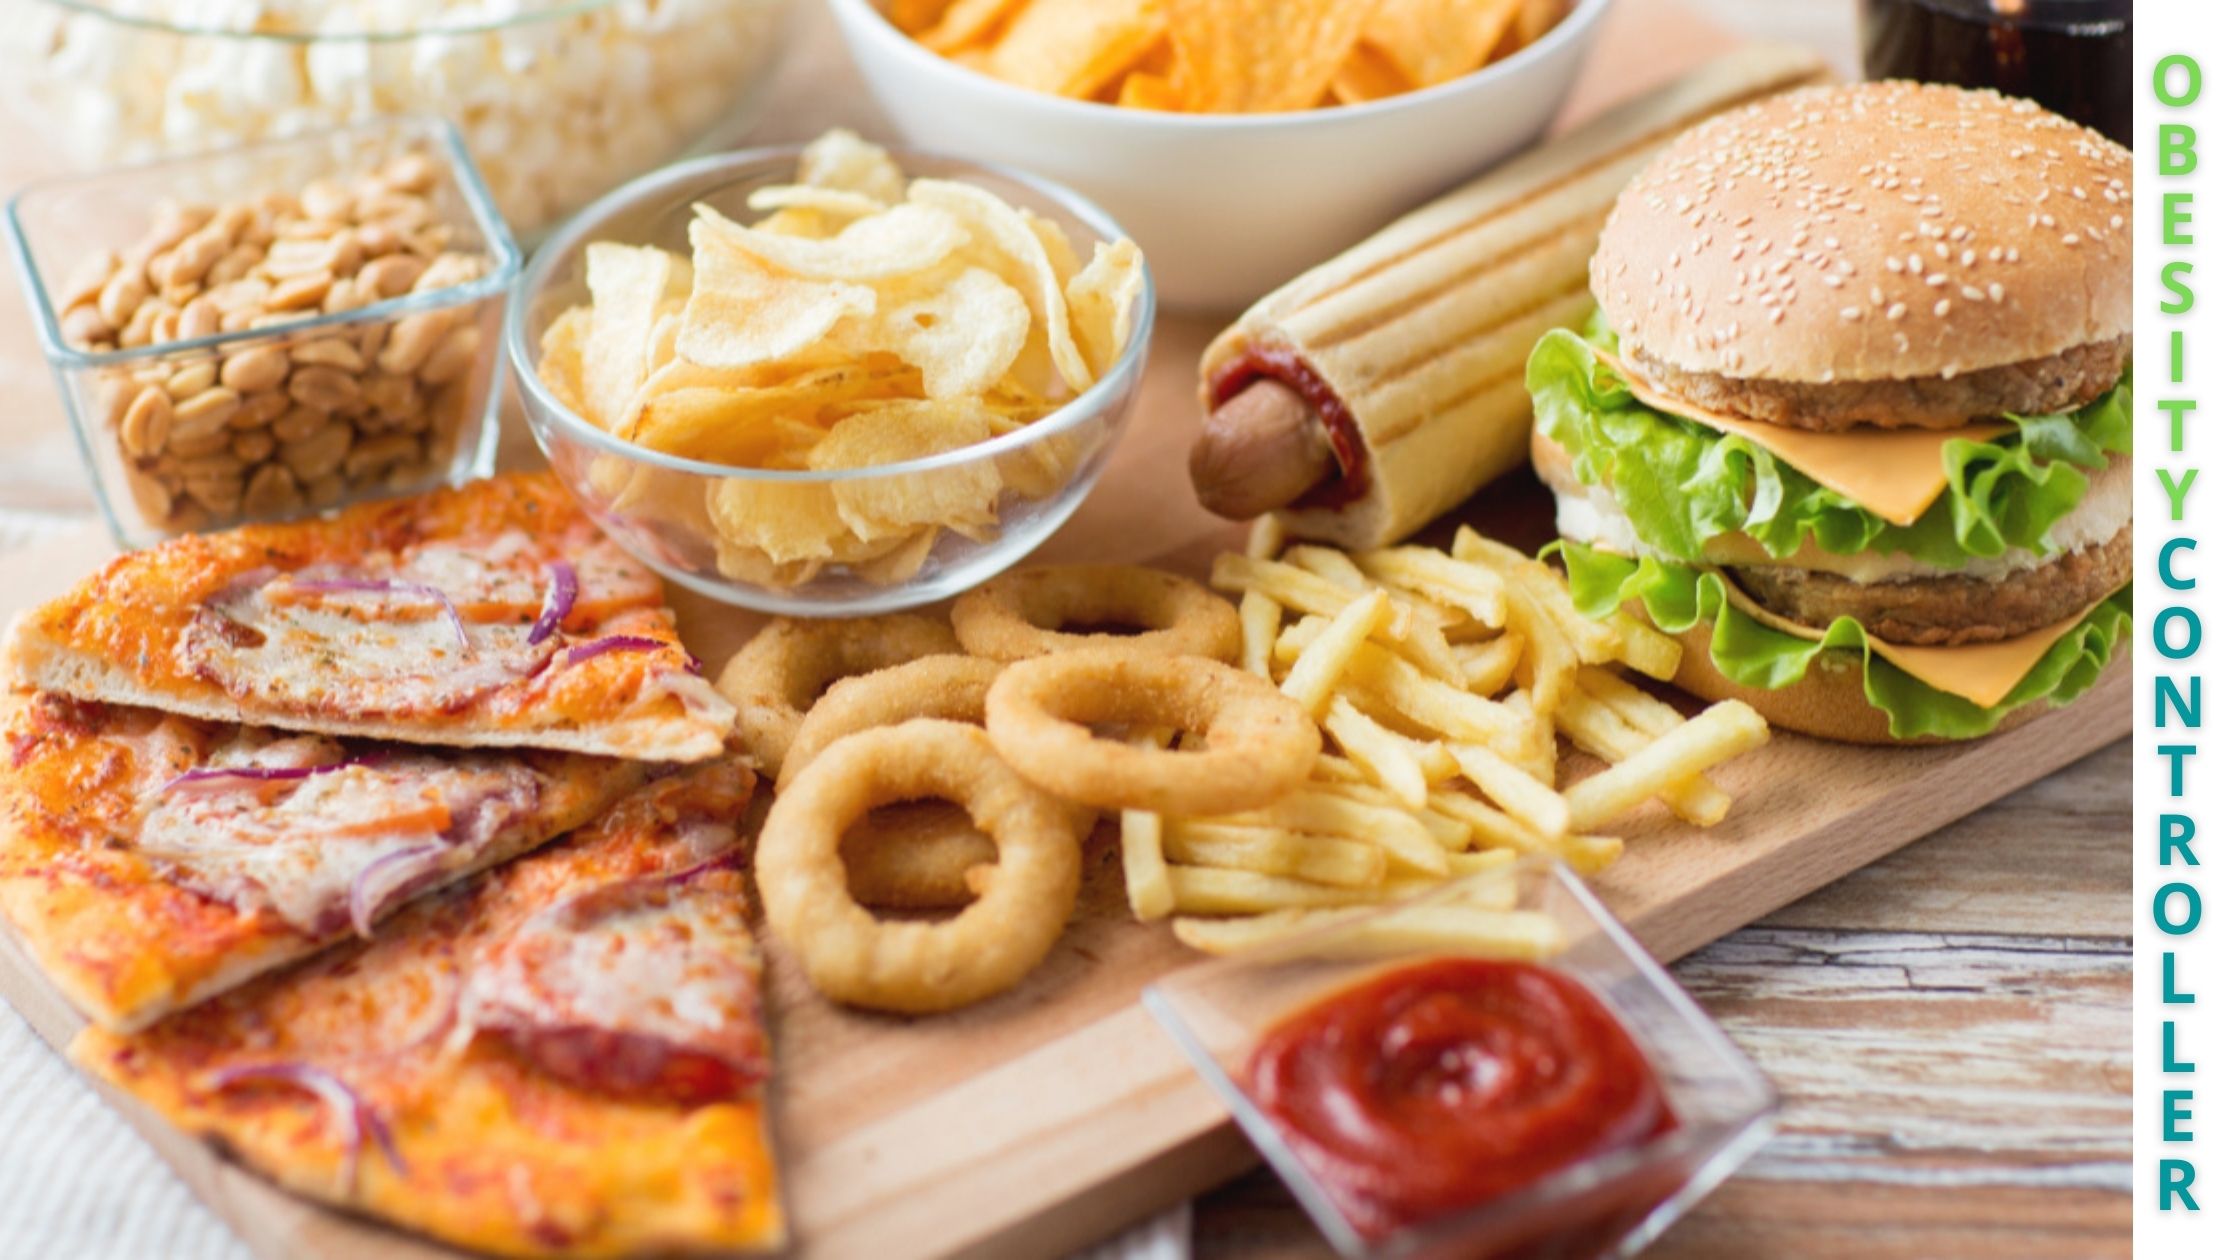 Research Suggests Ultra Processed Foods As A Part Of Balanced Diet